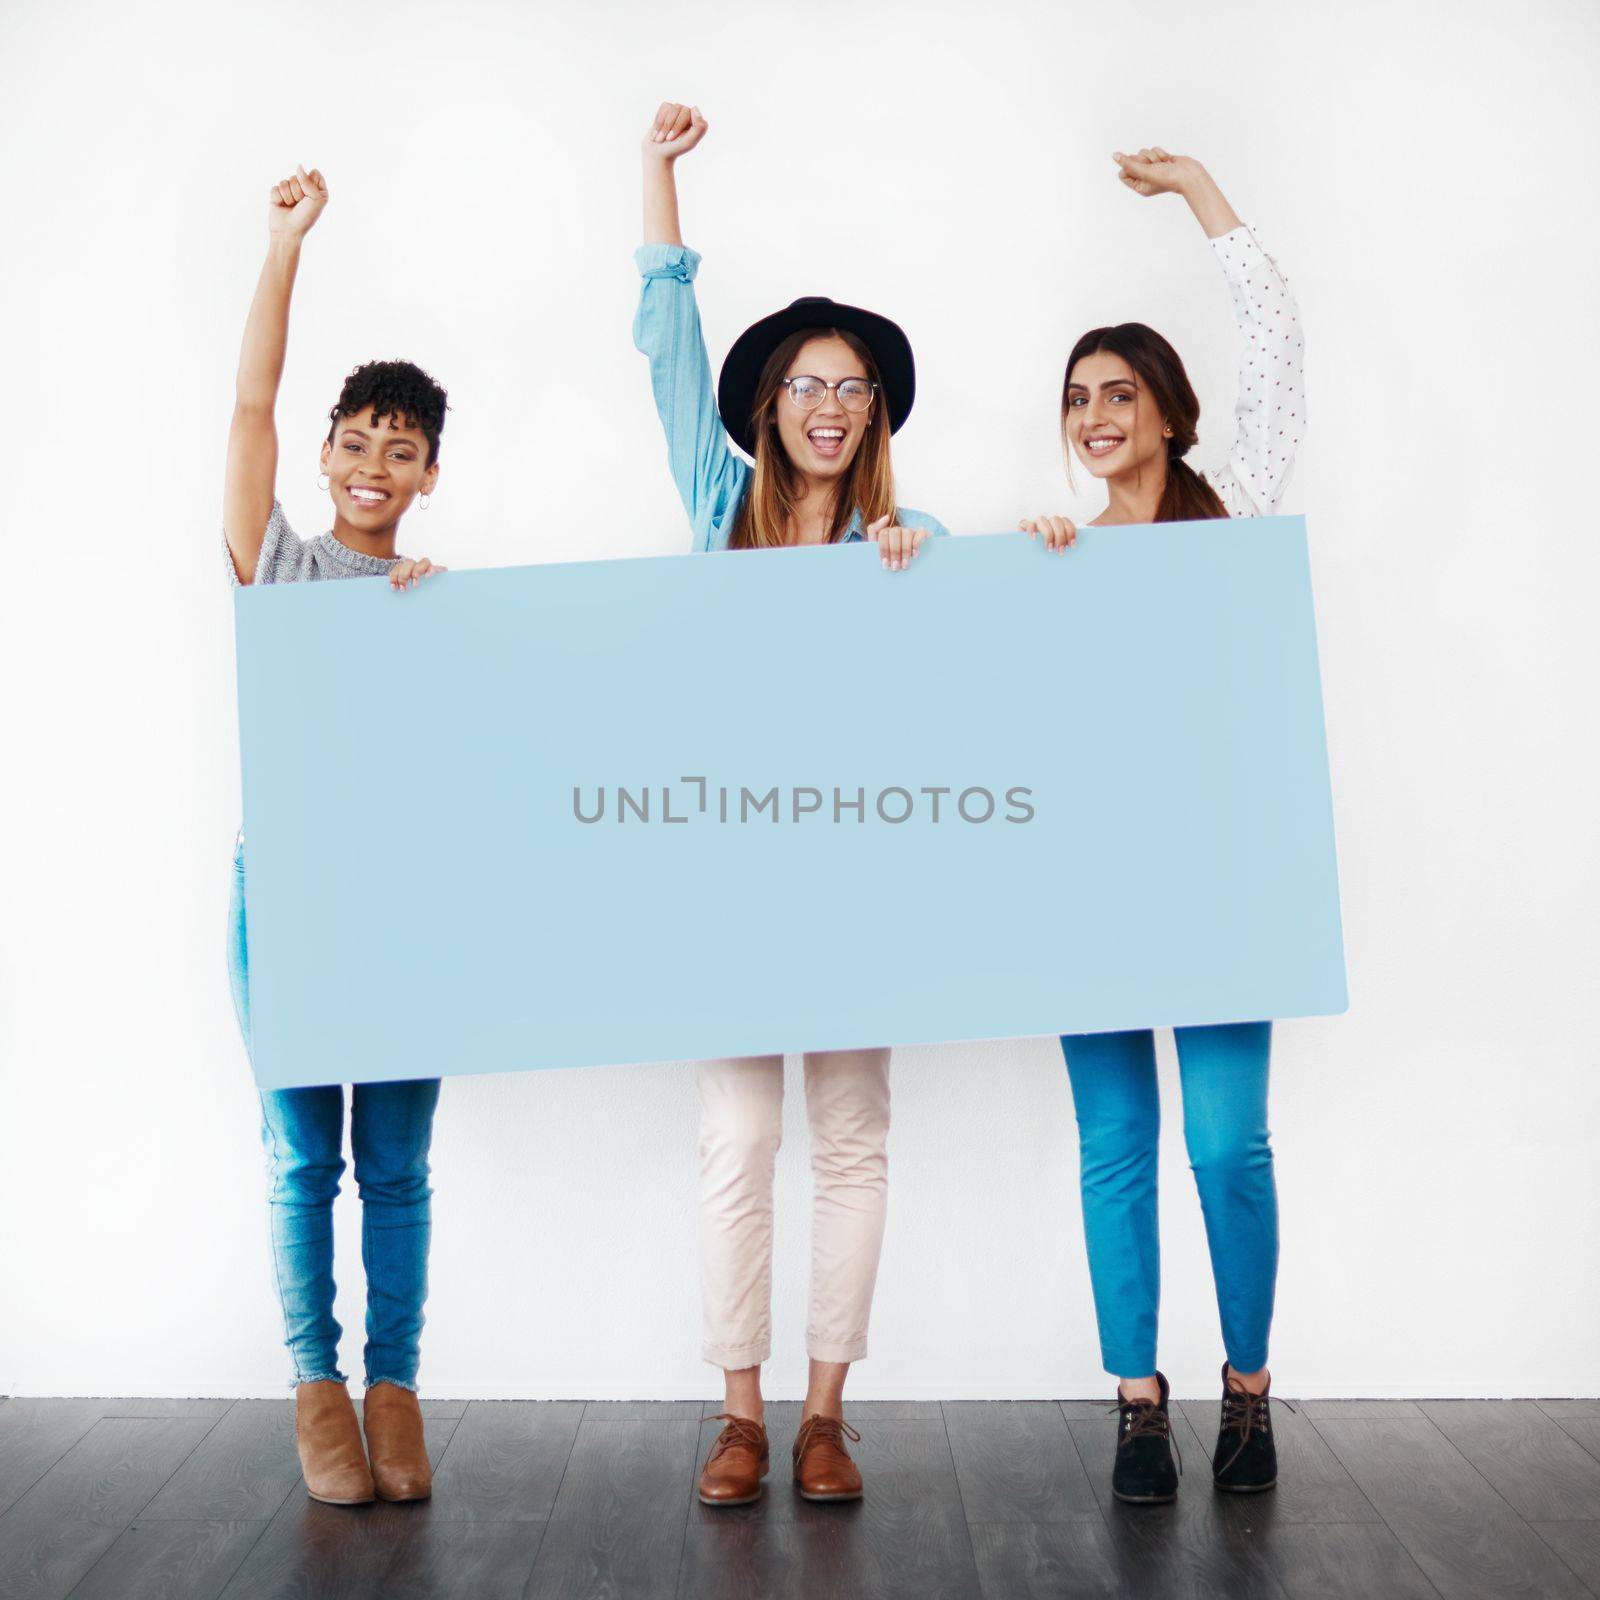 Stand up for something you believe in. Studio shot of a group of young women holding a blank placard and cheering against a white background. by YuriArcurs